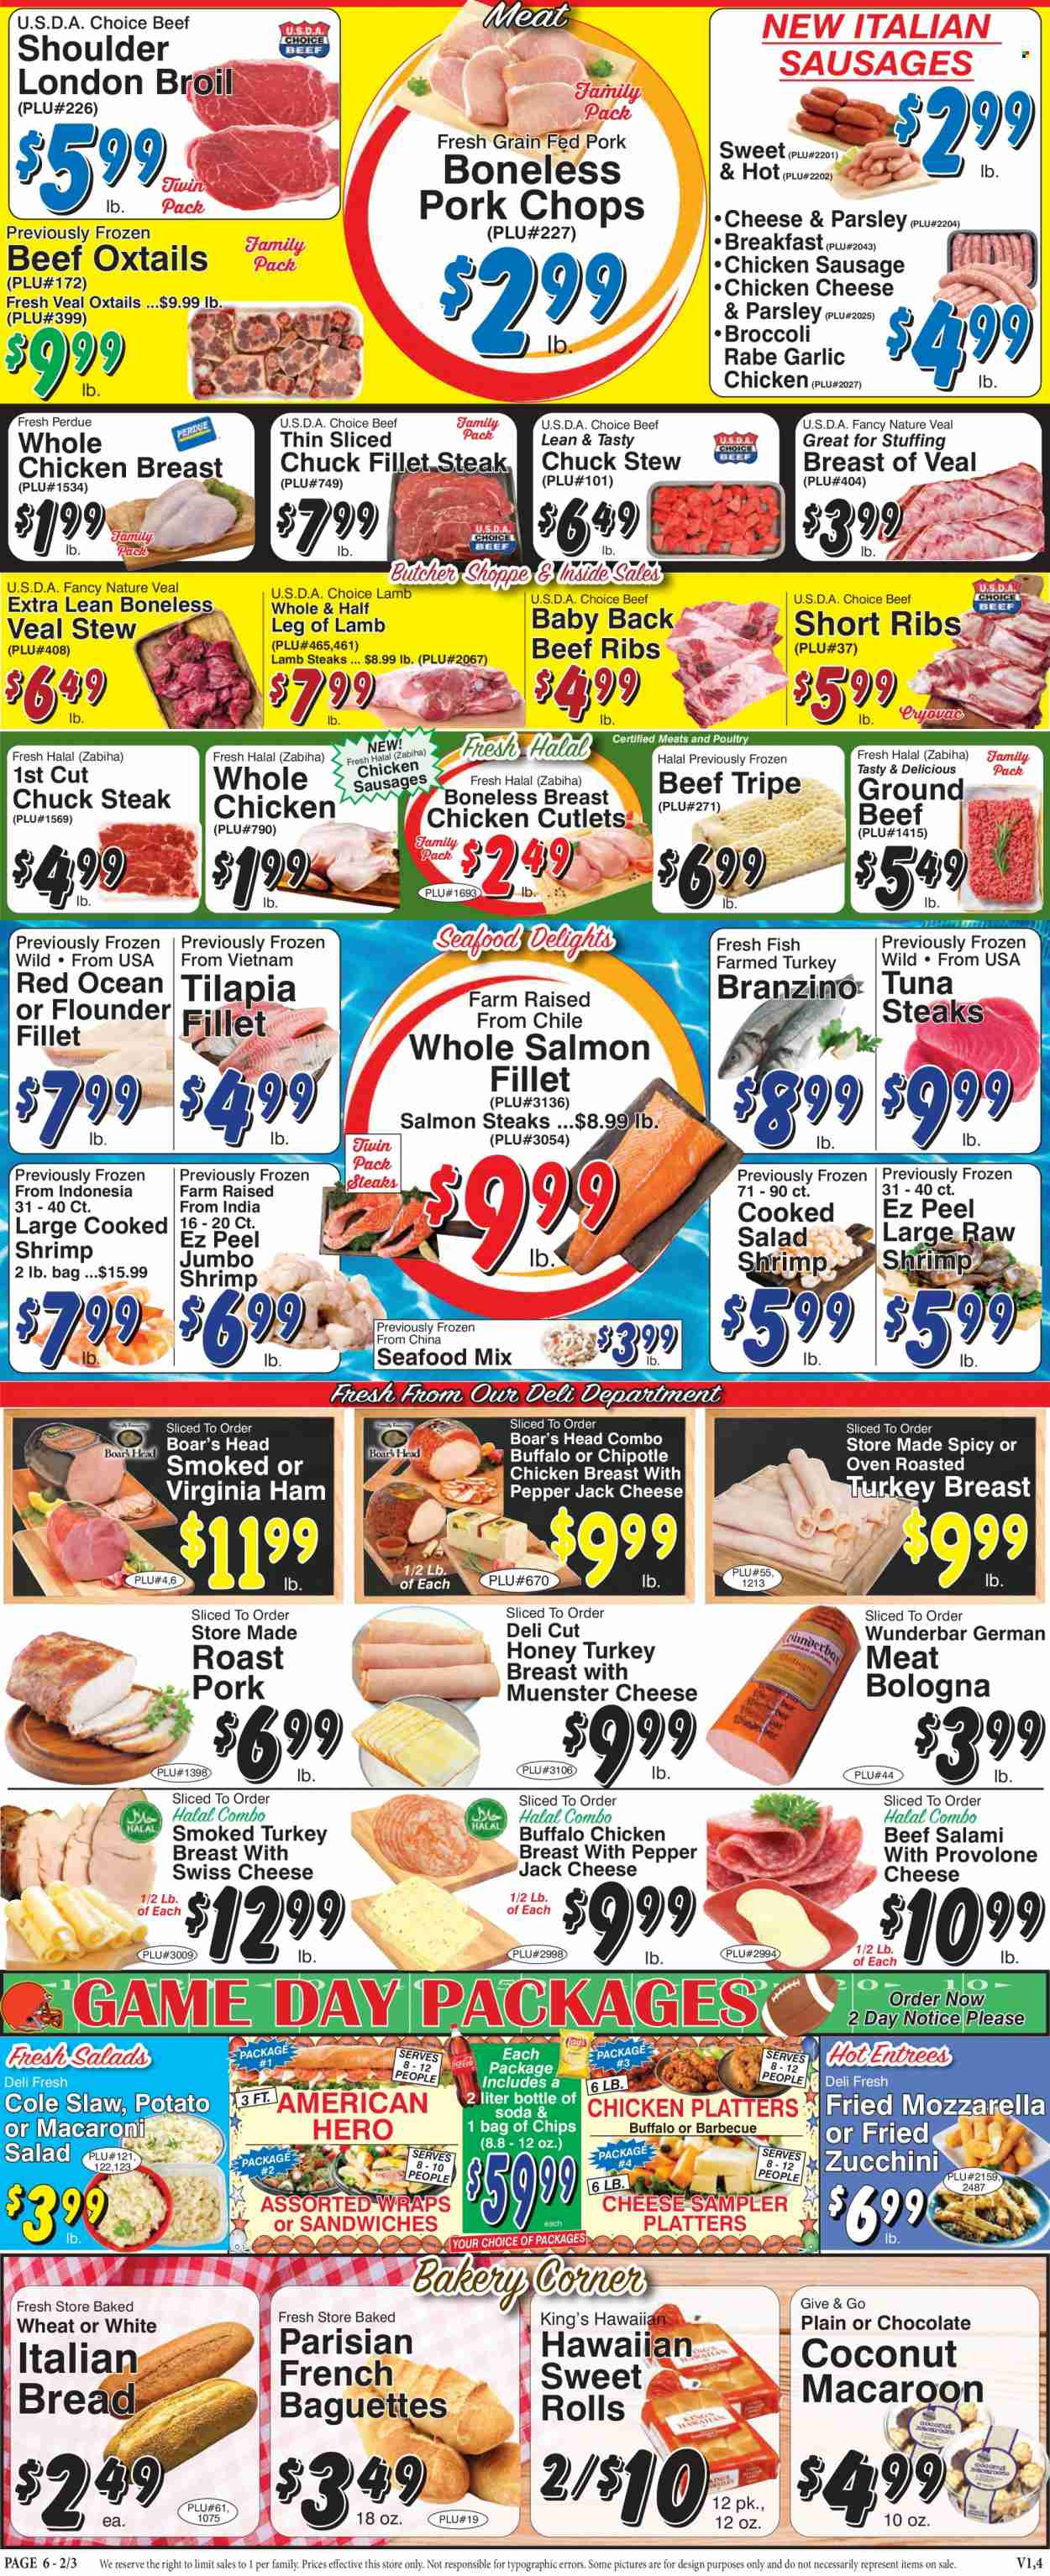 thumbnail - Trade Fair Supermarket Flyer - 02/03/2023 - 02/09/2023 - Sales products - baguette, bread, wraps, sweet rolls, broccoli, garlic, zucchini, parsley, broccolini, coconut, flounder, salmon, salmon fillet, tilapia, tuna, seafood, fish, shrimps, Perdue®, salami, ham, virginia ham, sausage, chicken sausage, macaroni salad, mozzarella, Pepper Jack cheese, Münster cheese, Provolone, chocolate, honey, soda, whole chicken, chicken breasts, chicken cutlets, beef meat, beef ribs, beef tripe, ground beef, steak, chuck steak, ribs, pork chops, pork meat, pork ribs, pork back ribs, lamb leg. Page 6.